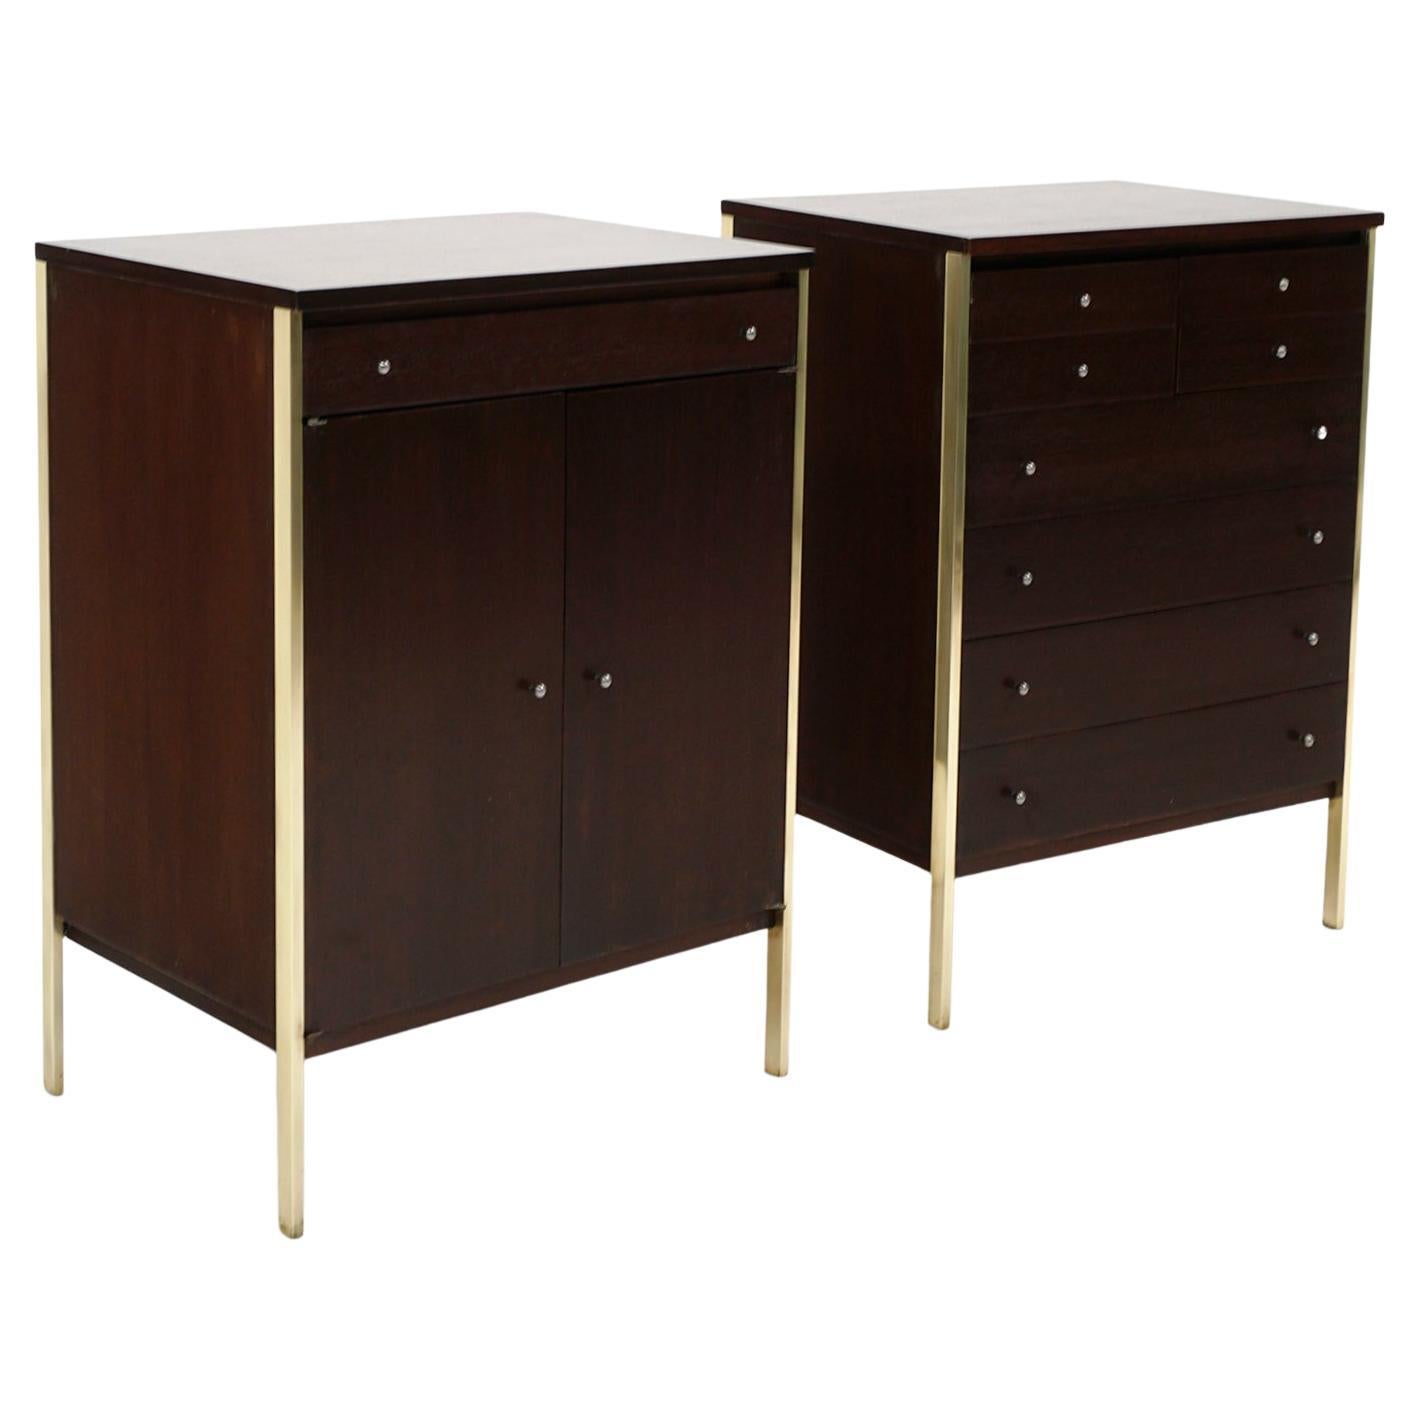 Pair Paul McCobb Cabinets in Mahogany and Polished Brass, Connoisseur Collection